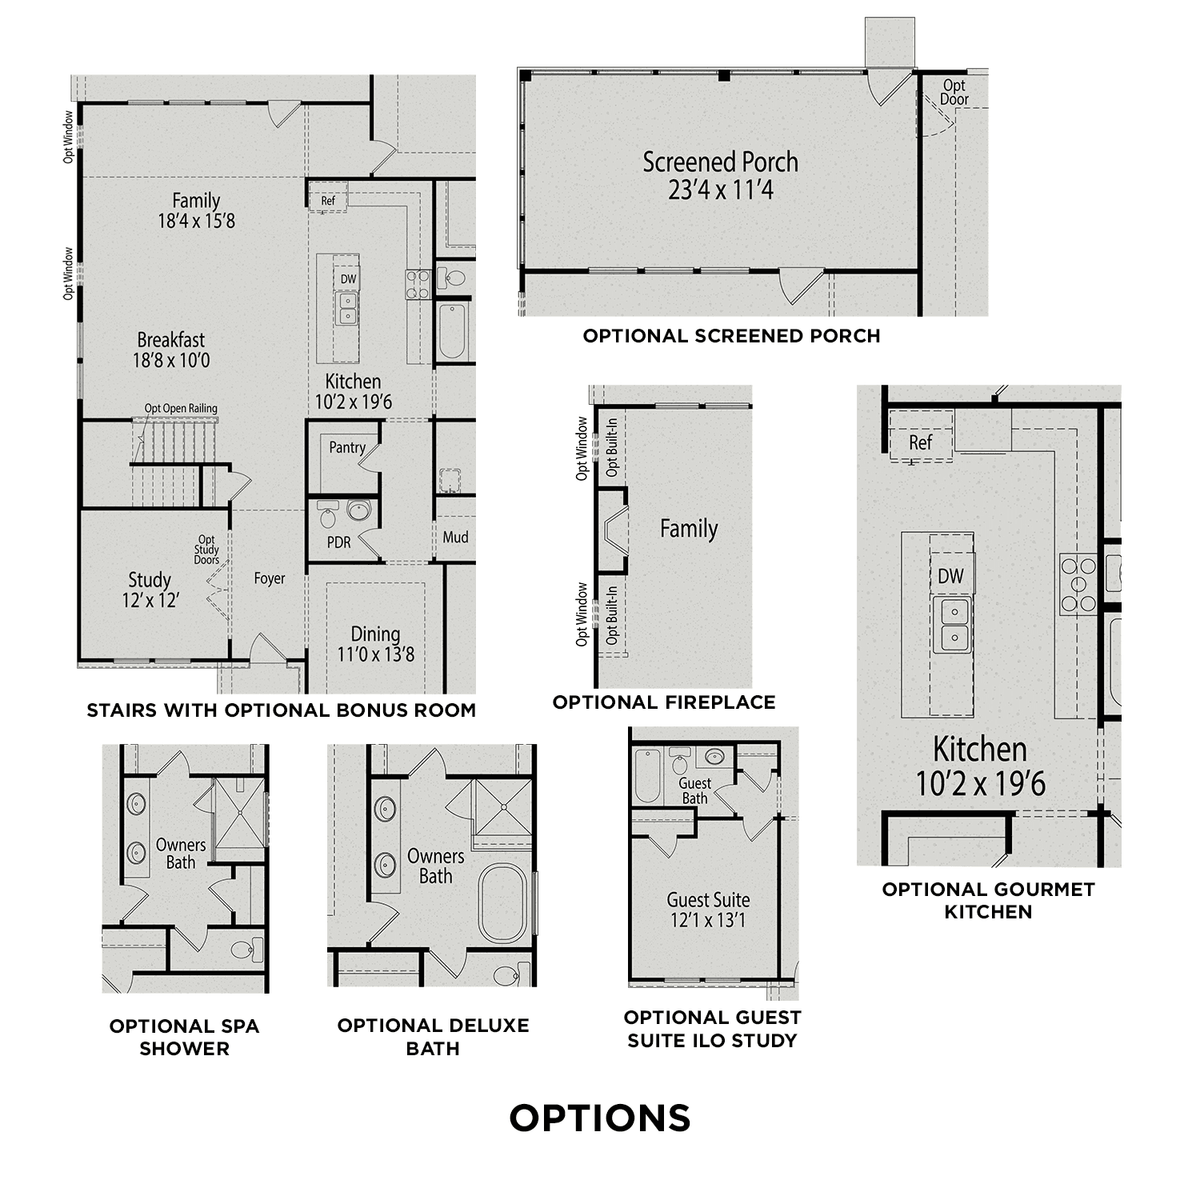 3 - The Magnolia D floor plan layout for 192 Castle Pond Way in Davidson Homes' Prince Place community.